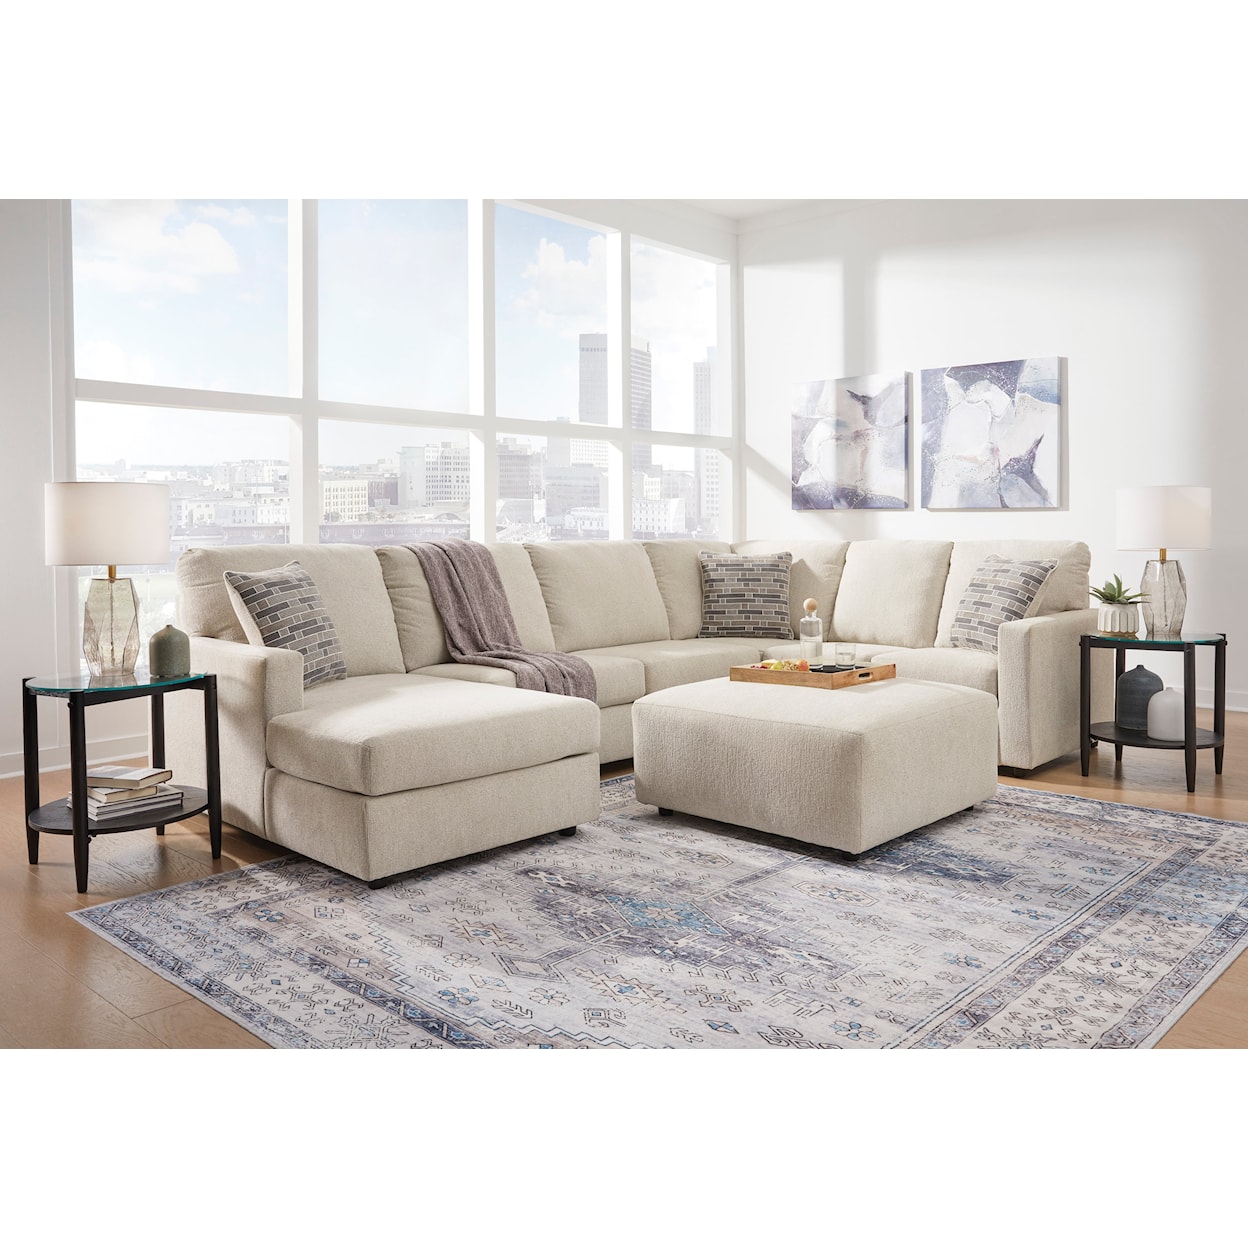 Signature Design by Ashley Edenfield Living Room Set